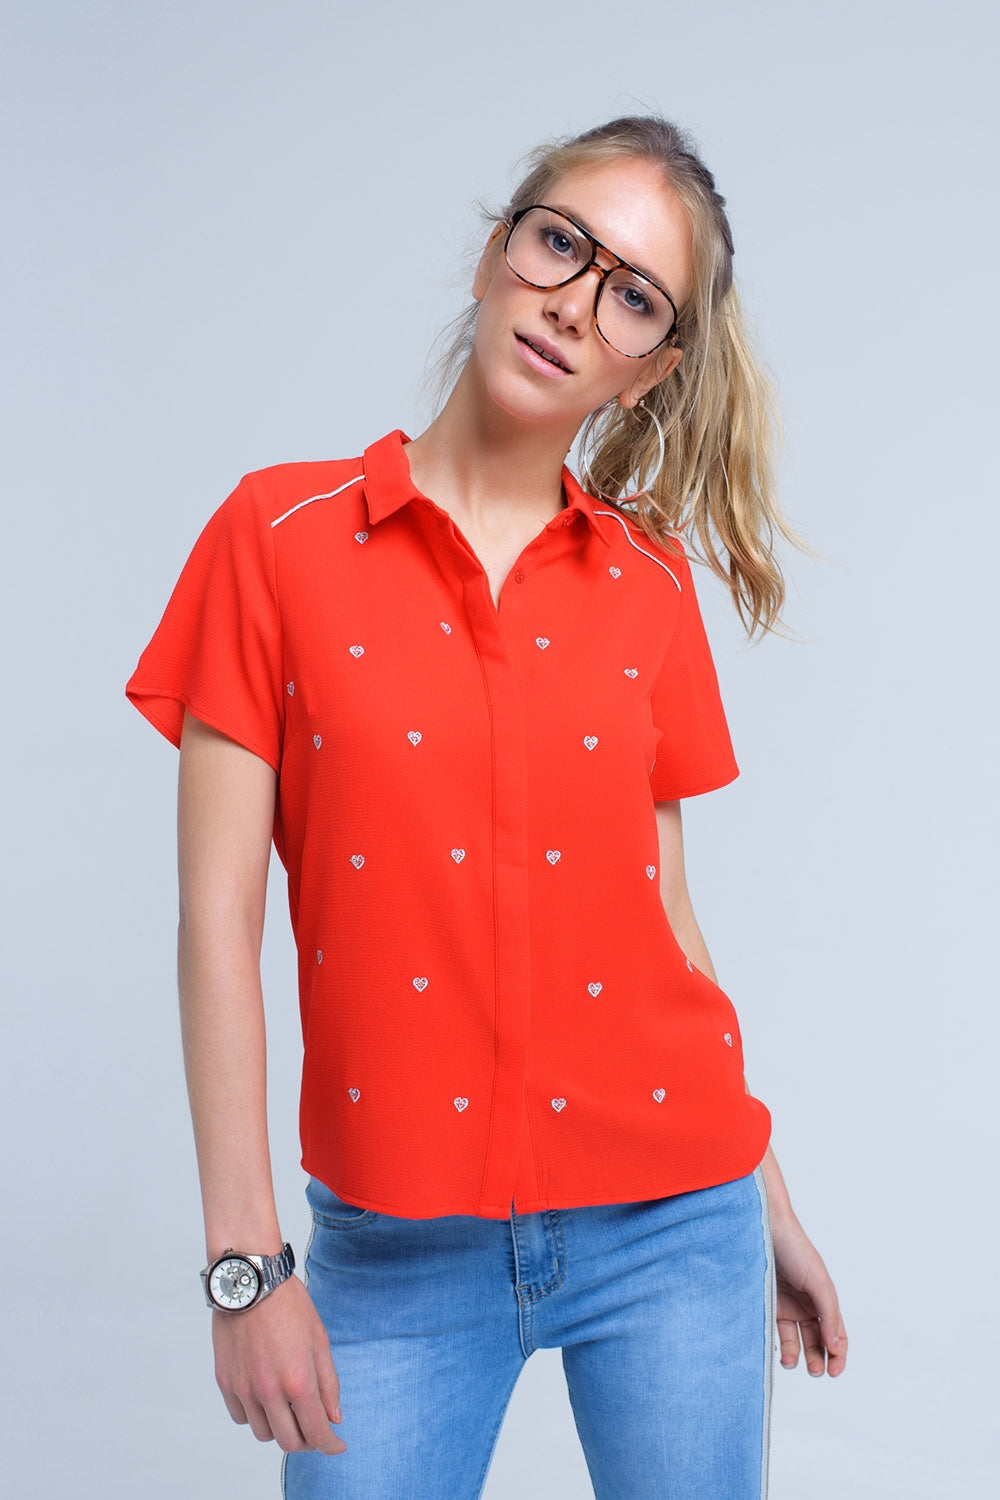 RM Red Shirt With Heart Embroidery